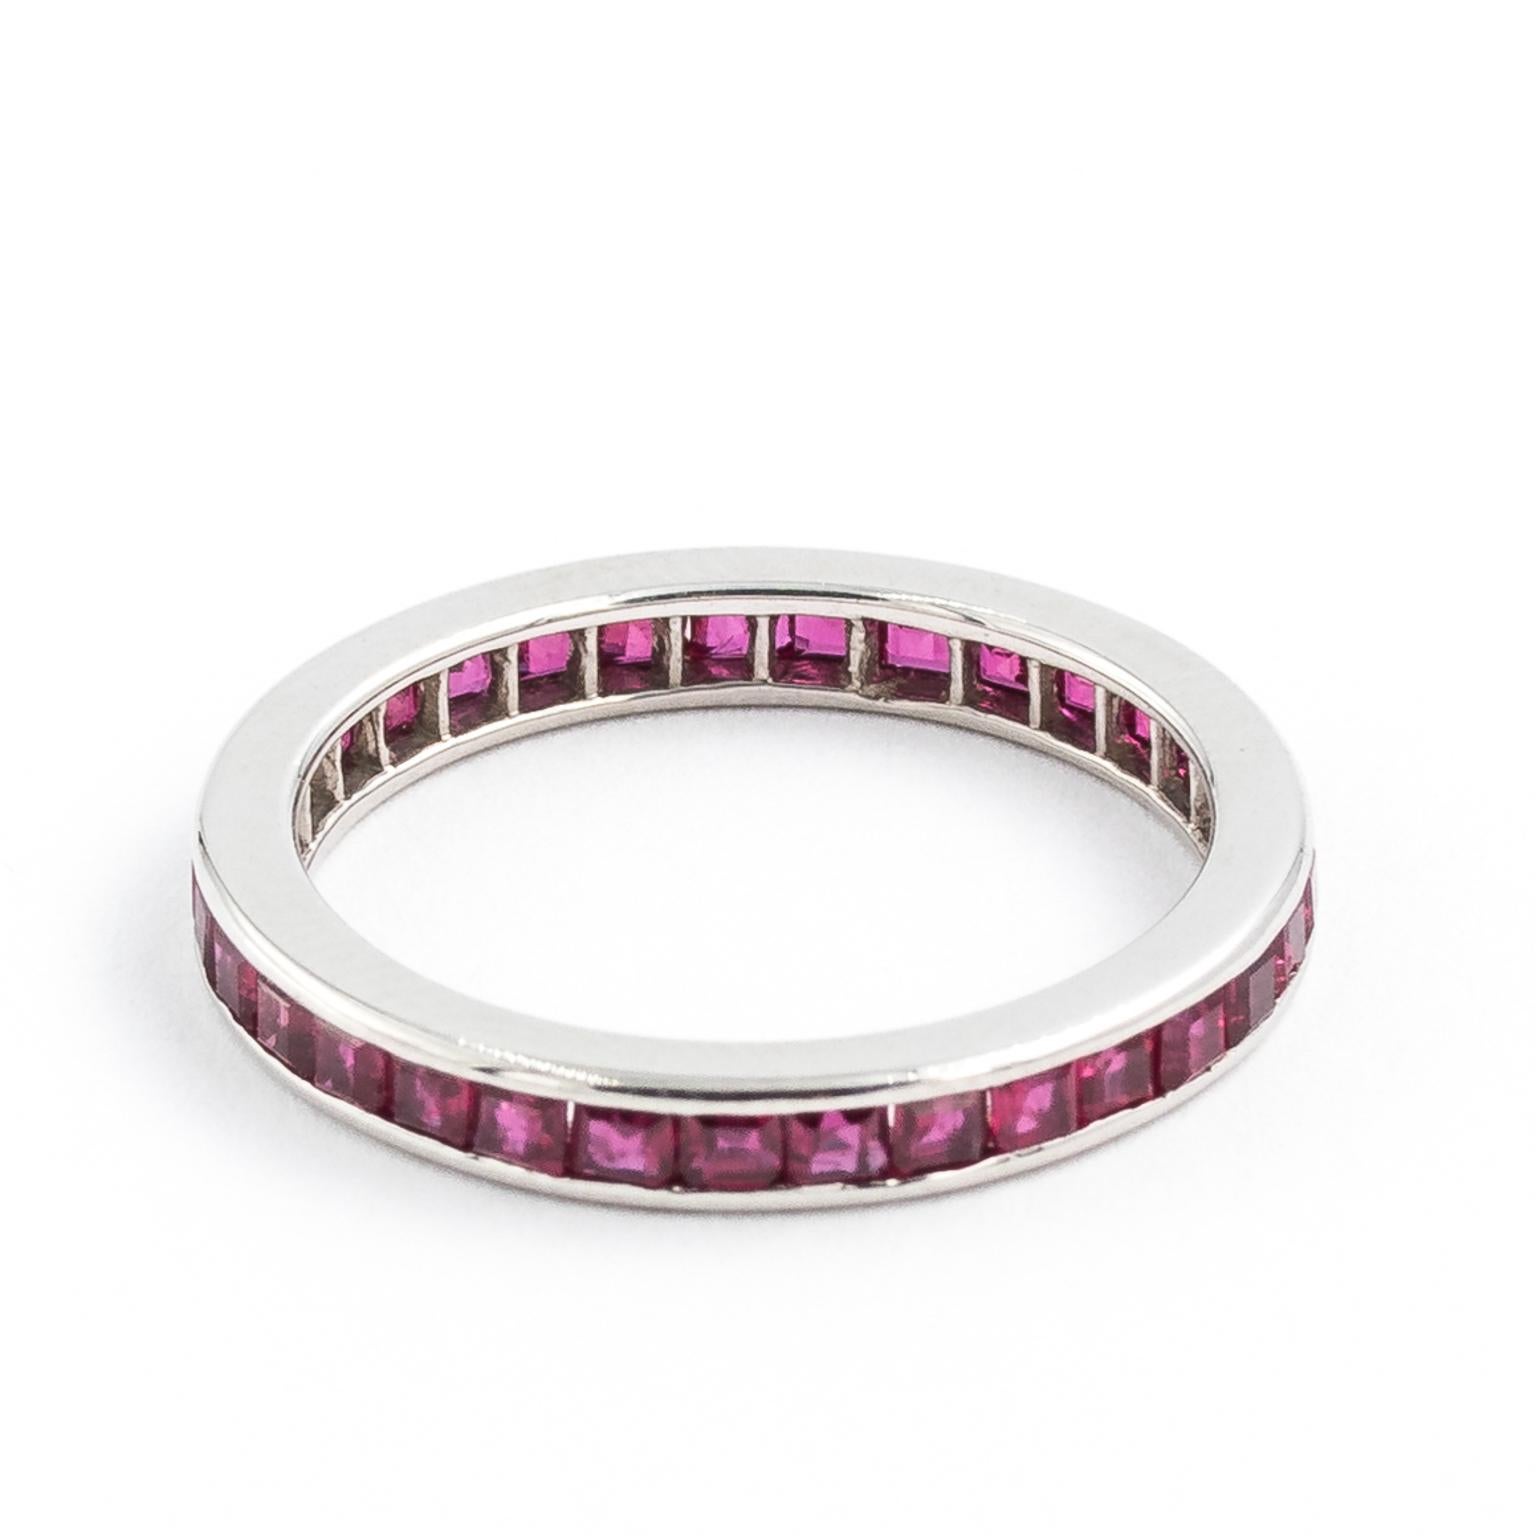 Constructed from solid platinum, the ring has an array of princess cut high quality natural Burma rubies invisible set along the platinum band. The rubies are carefully selected with matching color, highly transparent, only one or two of them has